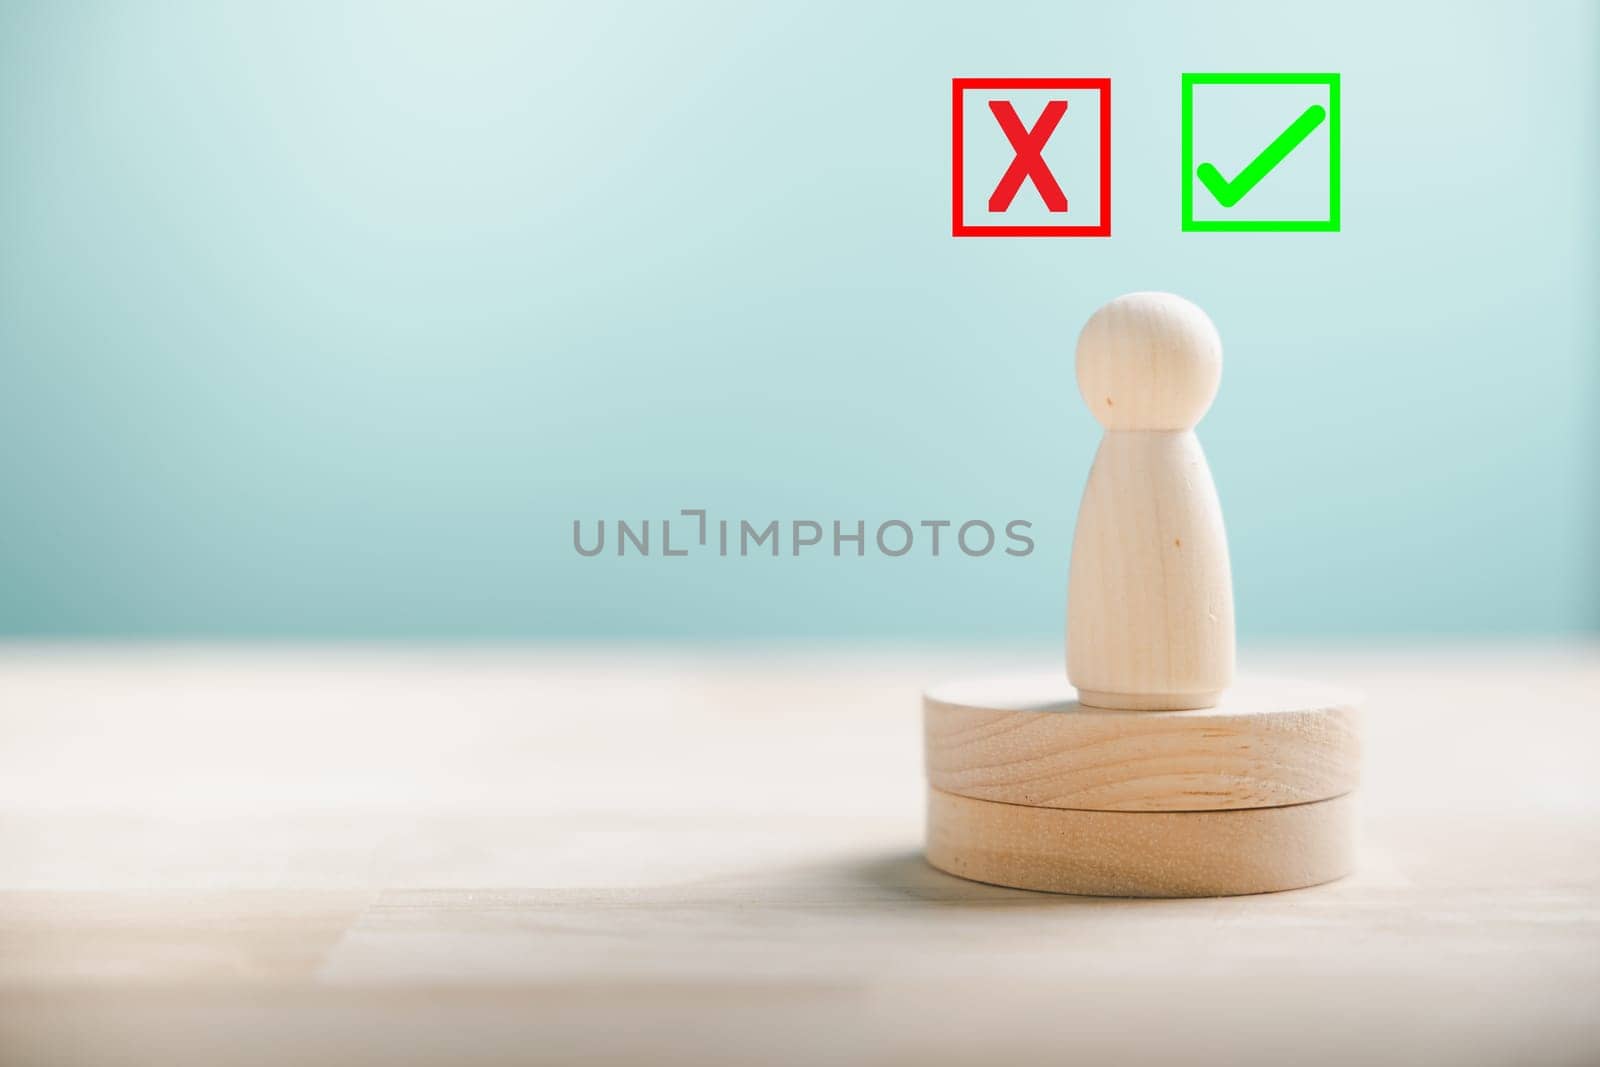 Displaying people's choices on wooden blocks between right and wrong reflecting yes or no. True and false symbols signify business decision-making. Think With Yes Or No Choice.